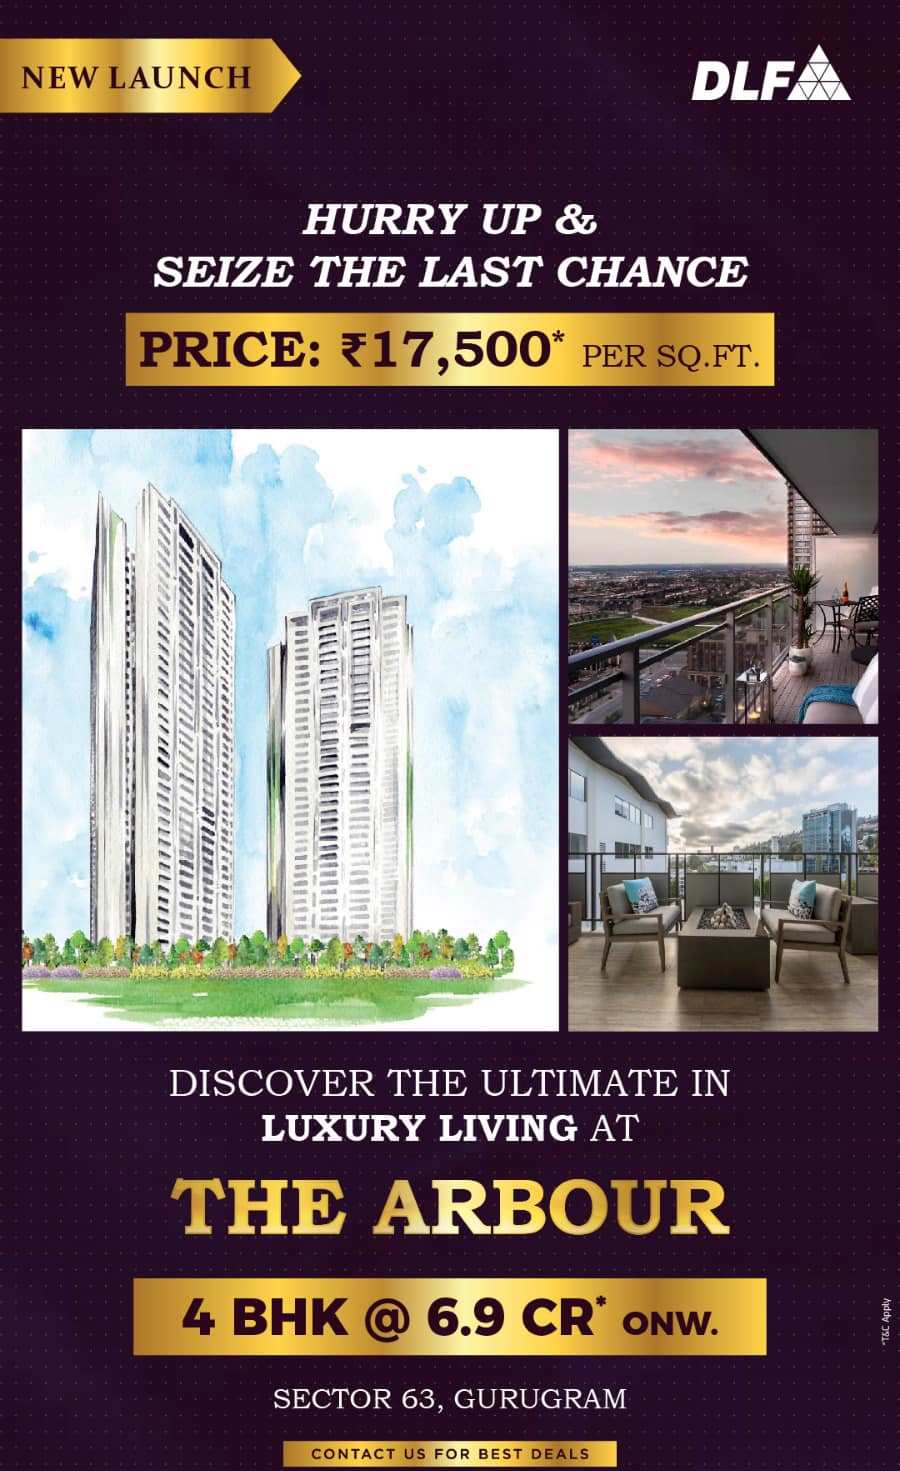 Hurry up & seize the last chance price Rs 17500 per sqft at DLF The Arbour, Gurgaon Update